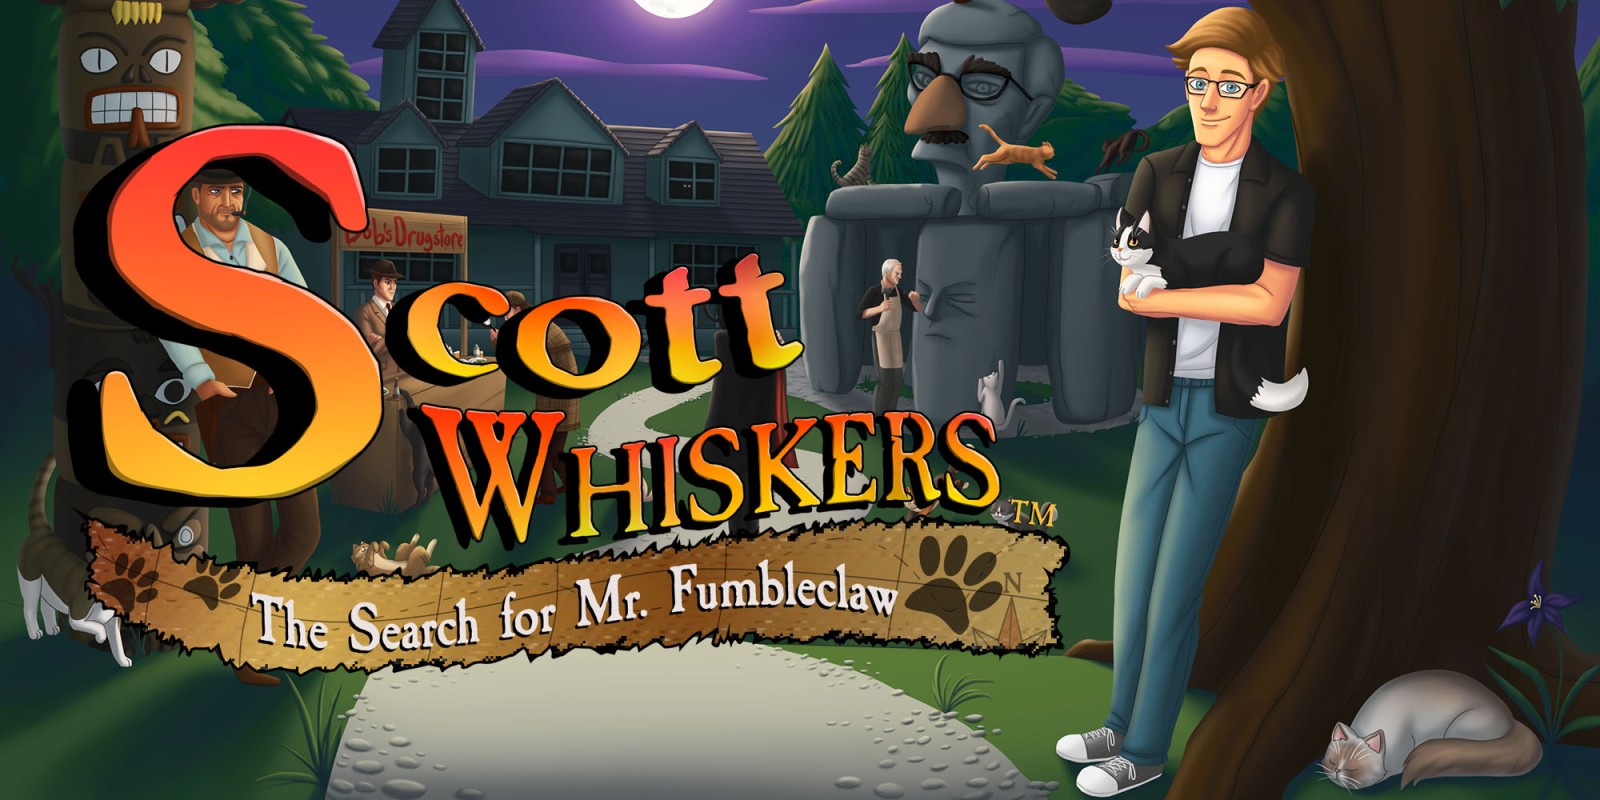 Scott Whiskers in the Search for Mr. Fumbleclaw - Key art